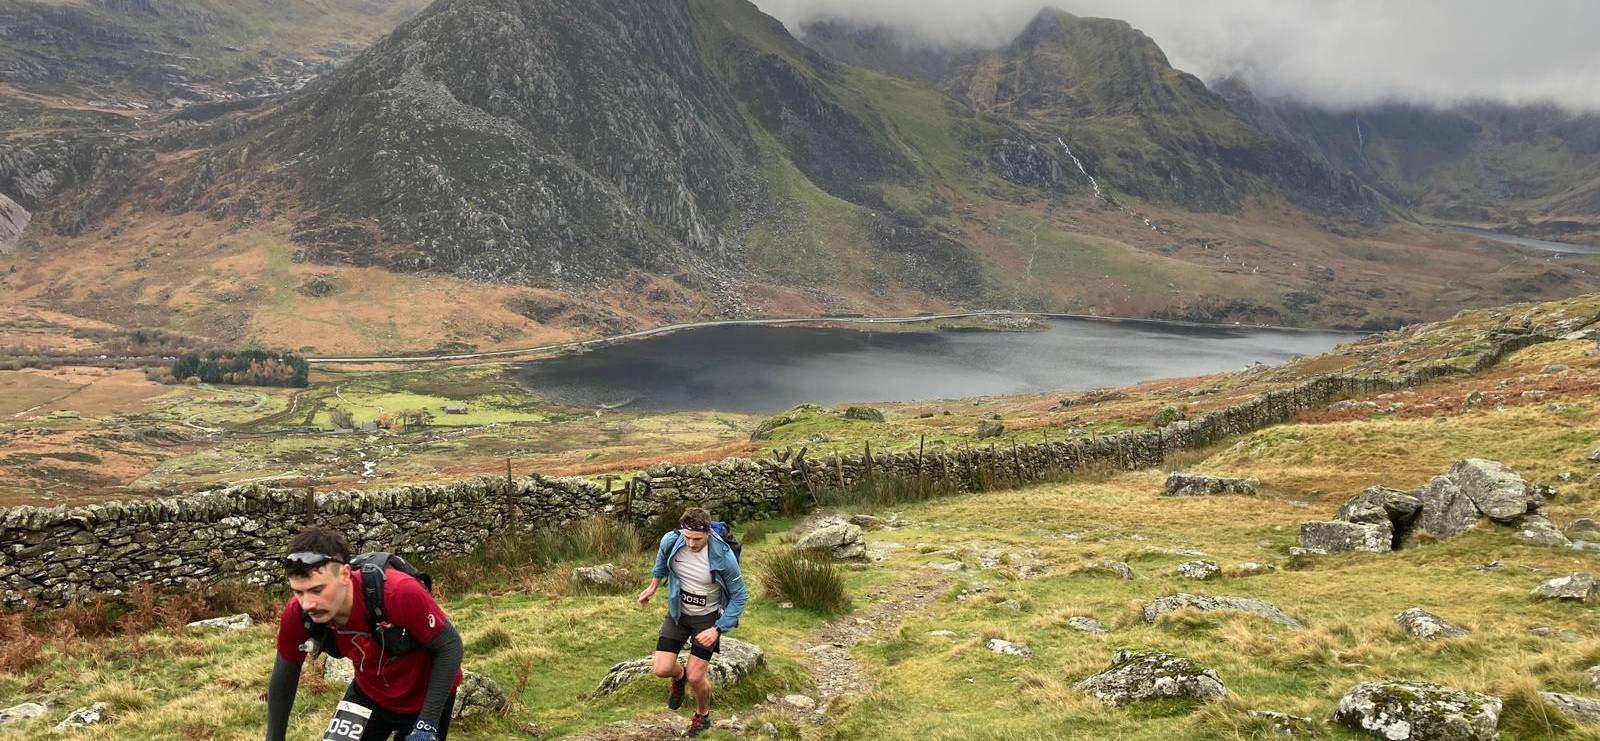 Runners in the Ogwen Valley with Tryfan in the background